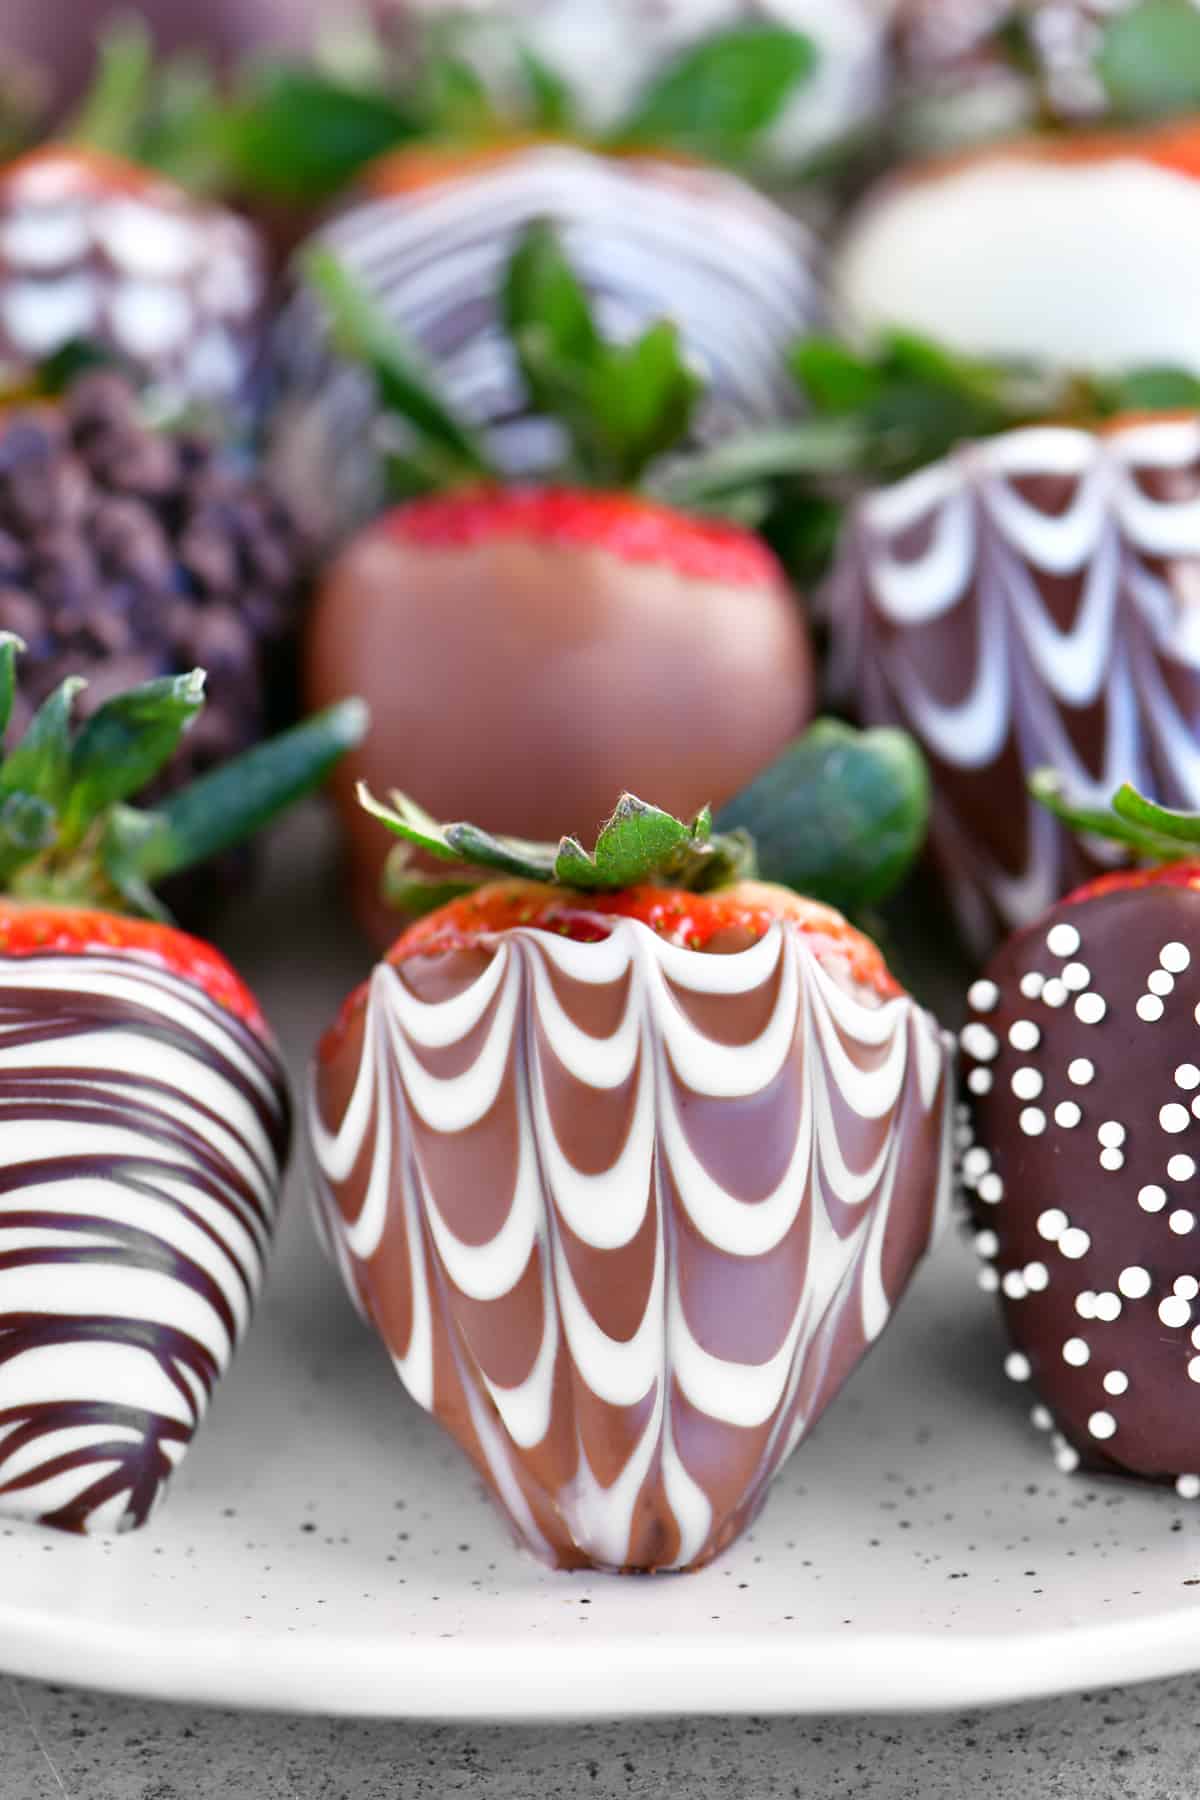 pattern on a chocolate dipped strawberry